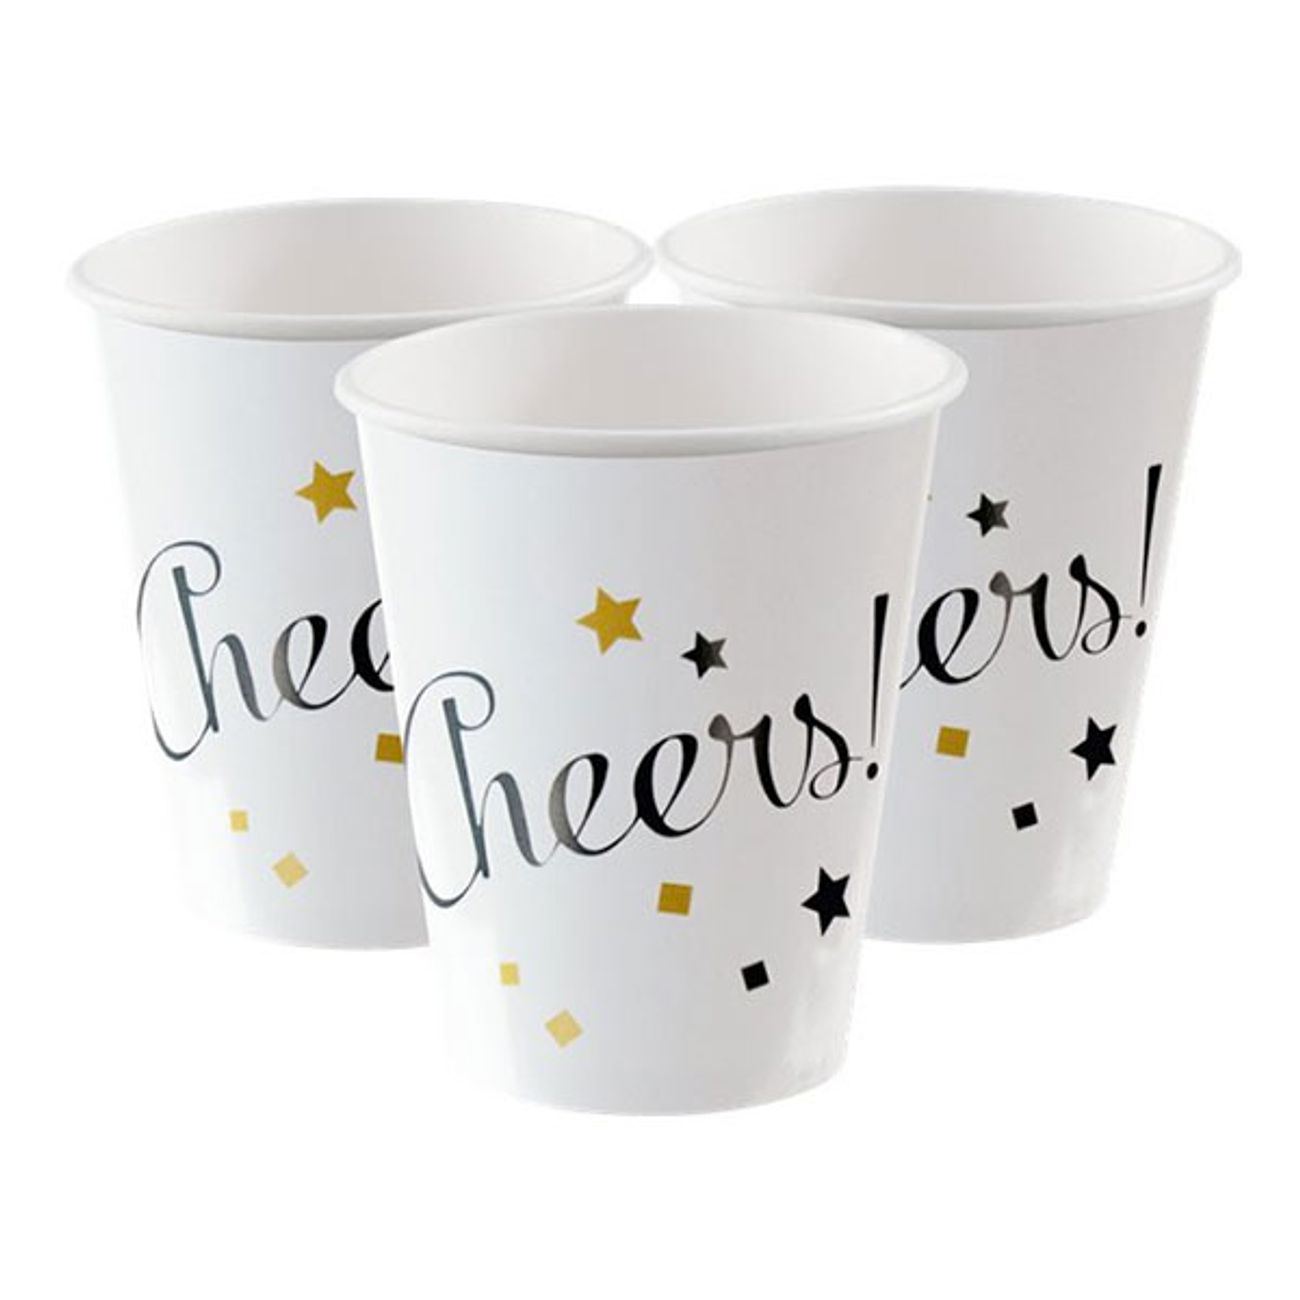 new-year-cups-250ml-1